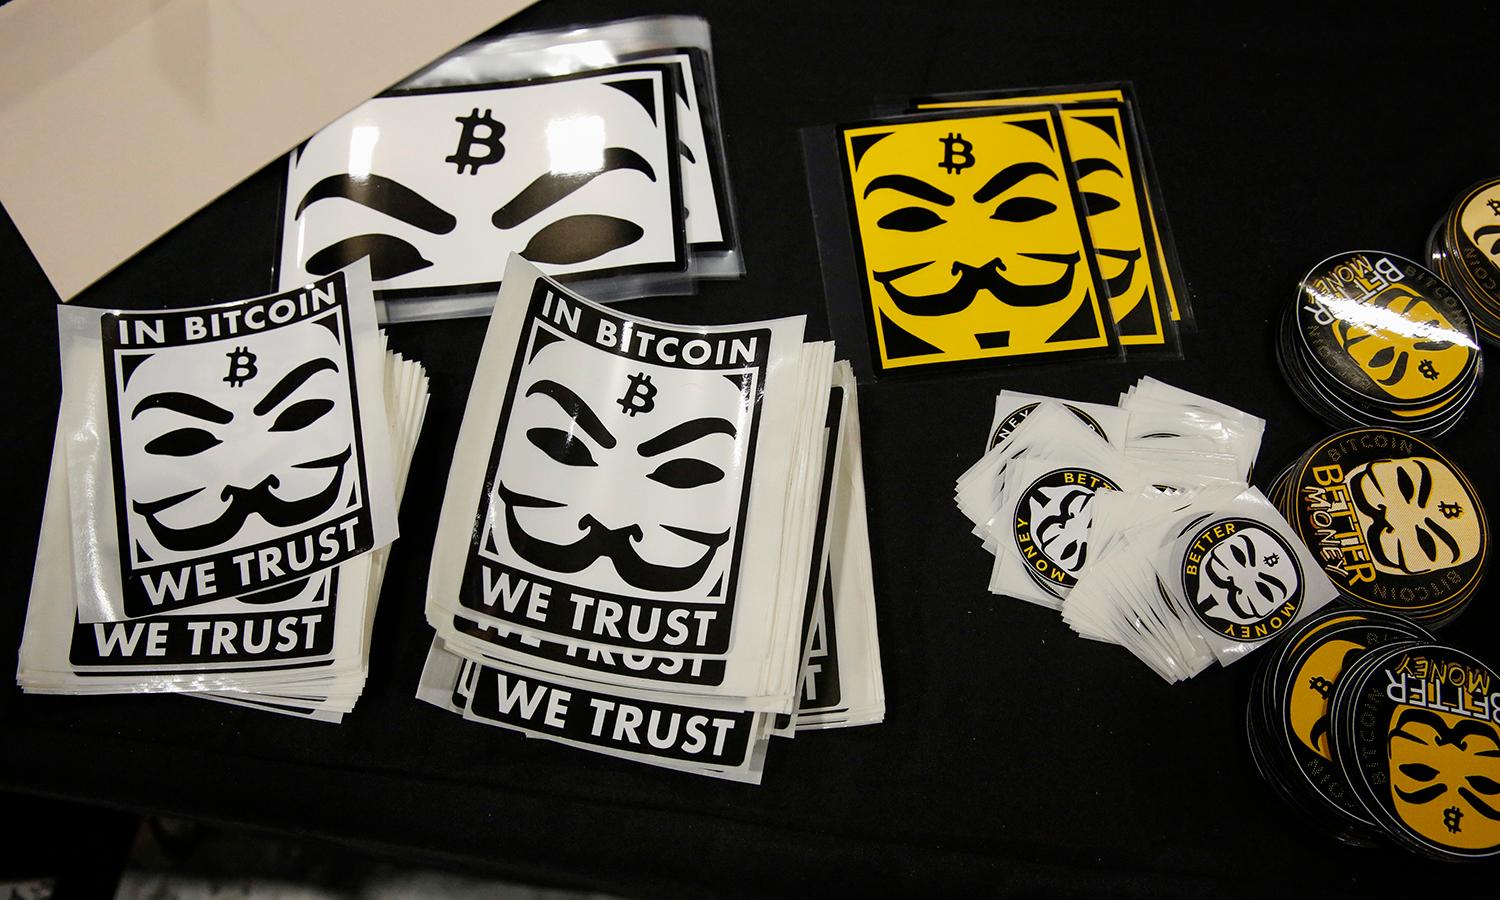 Stickers depicting Guy Fawkes masks (Anonymous mask) and the bitcoin logo are seen at a stand